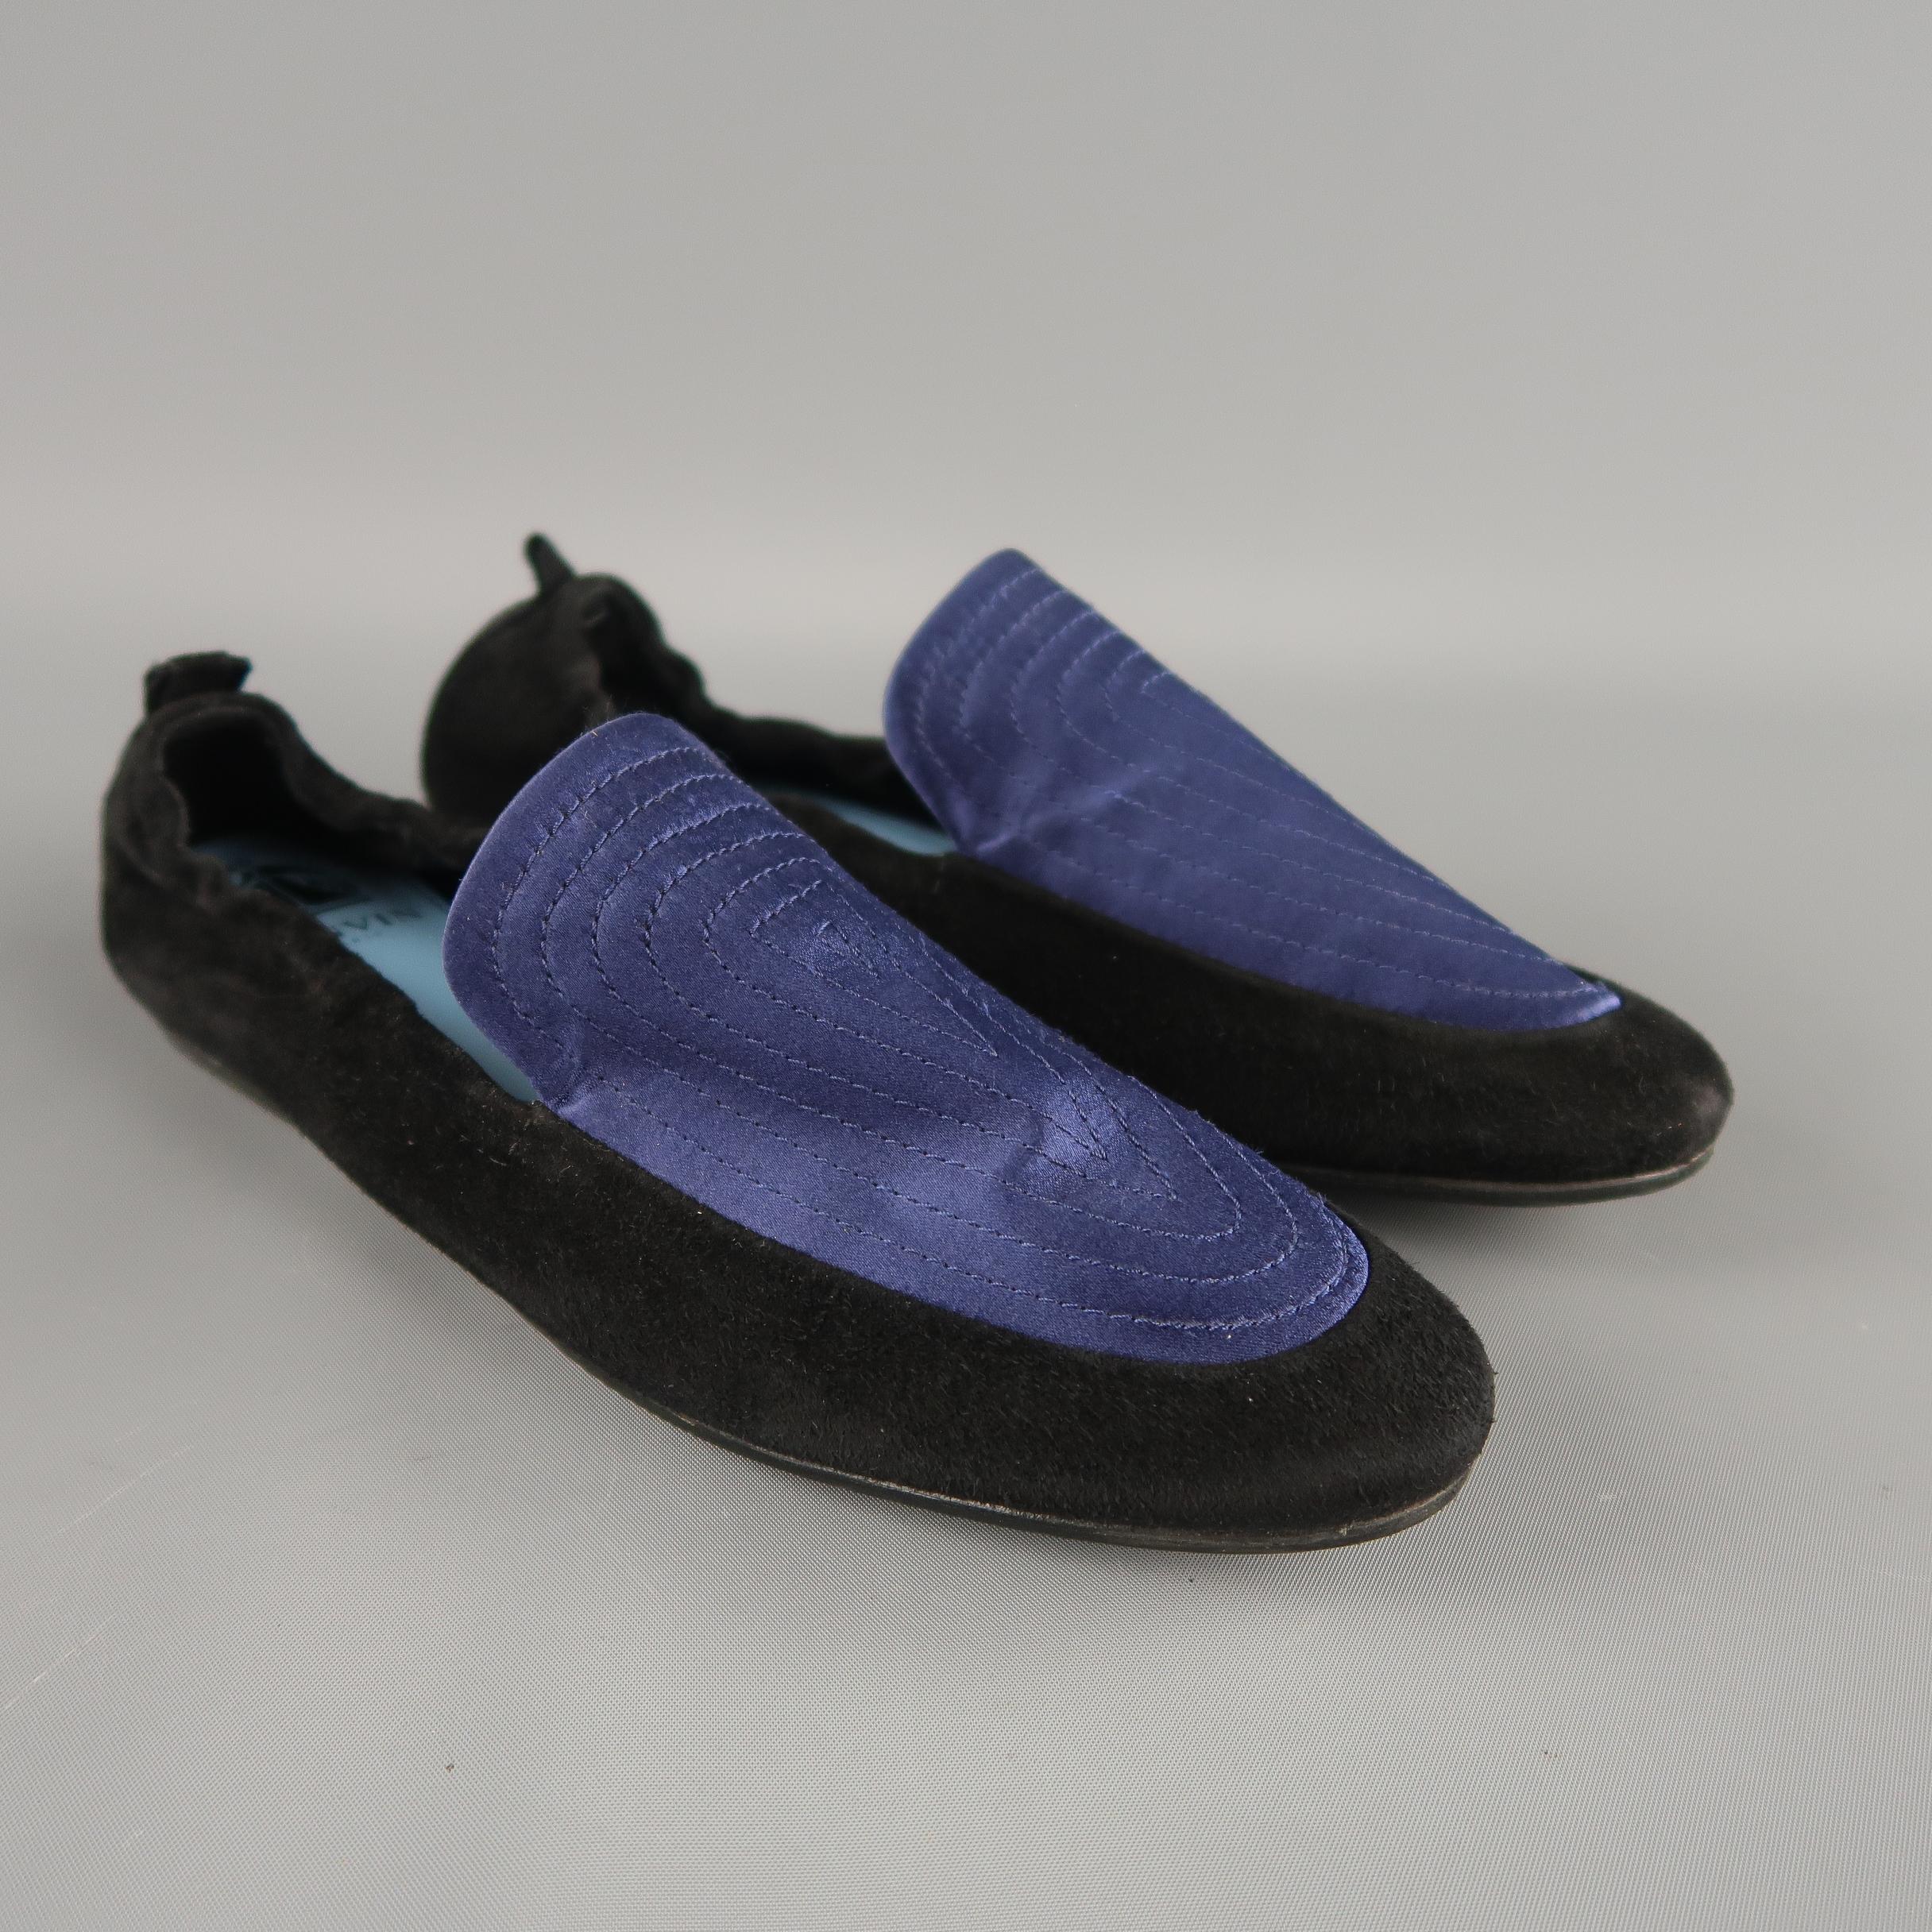 LANVIN loafer slipper style flats come in black suede with a navy blue quilted silk tongue panel and elasticized back. Made in Portugal.
 
Excellent Pre-Owned Condition.
Marked: (resoled. no size)